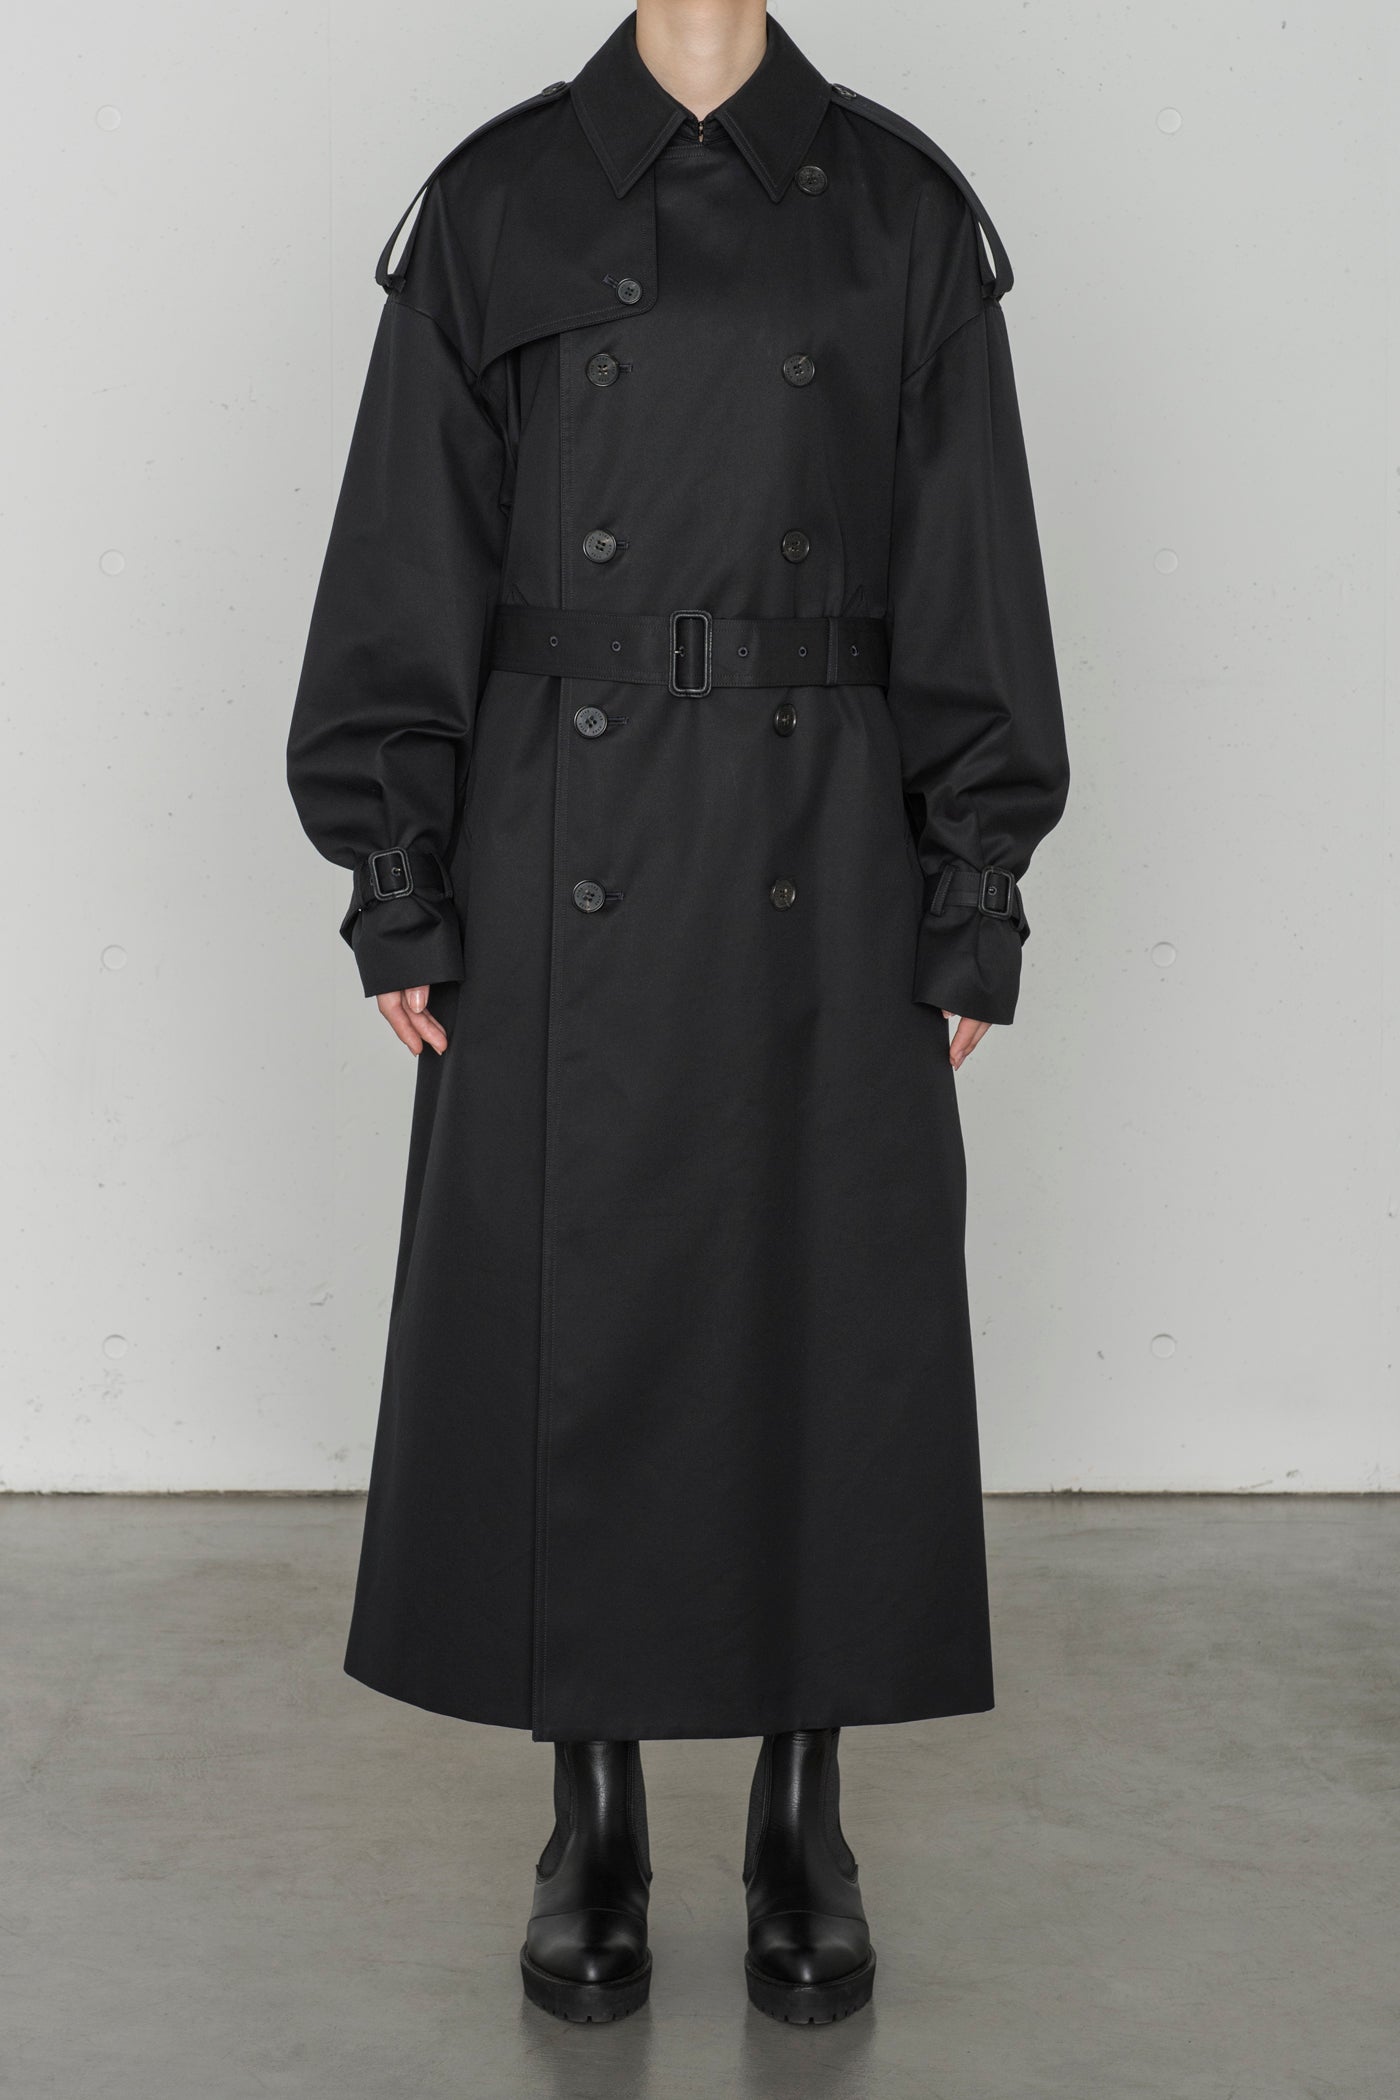 OUTER – HYKE ONLINE STORE